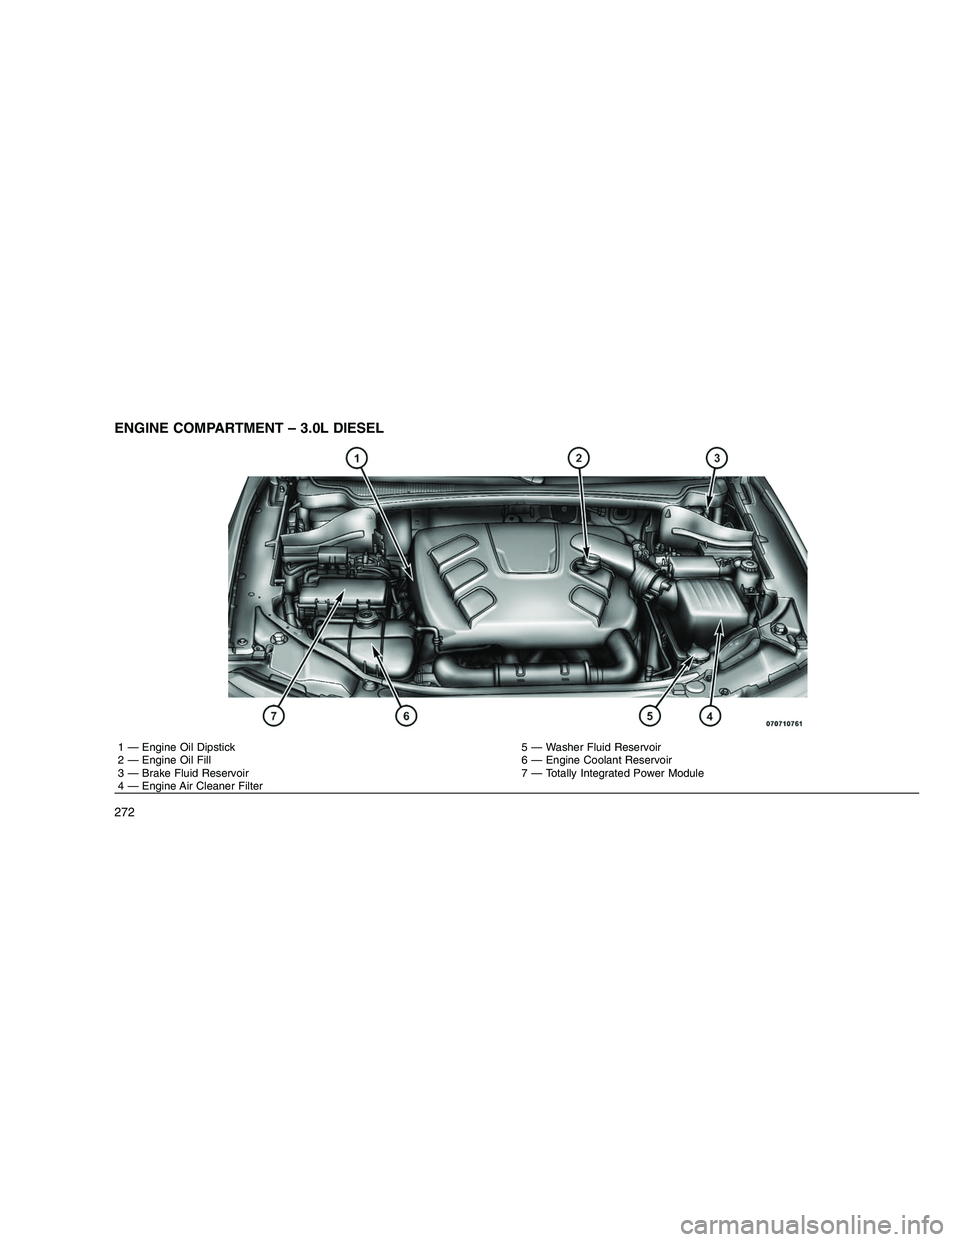 JEEP GRAND CHEROKEE 2011  Owner handbook (in English) 
ENGINE COMPARTMENT – 3.0L DIESEL
1 — Engine Oil Dipstick 5 — Washer Fluid Reservoir
2 — Engine Oil Fill 6 — Engine Coolant Reservoir
3 — Brake Fluid Reservoir 7 — Totally Integrated Pow